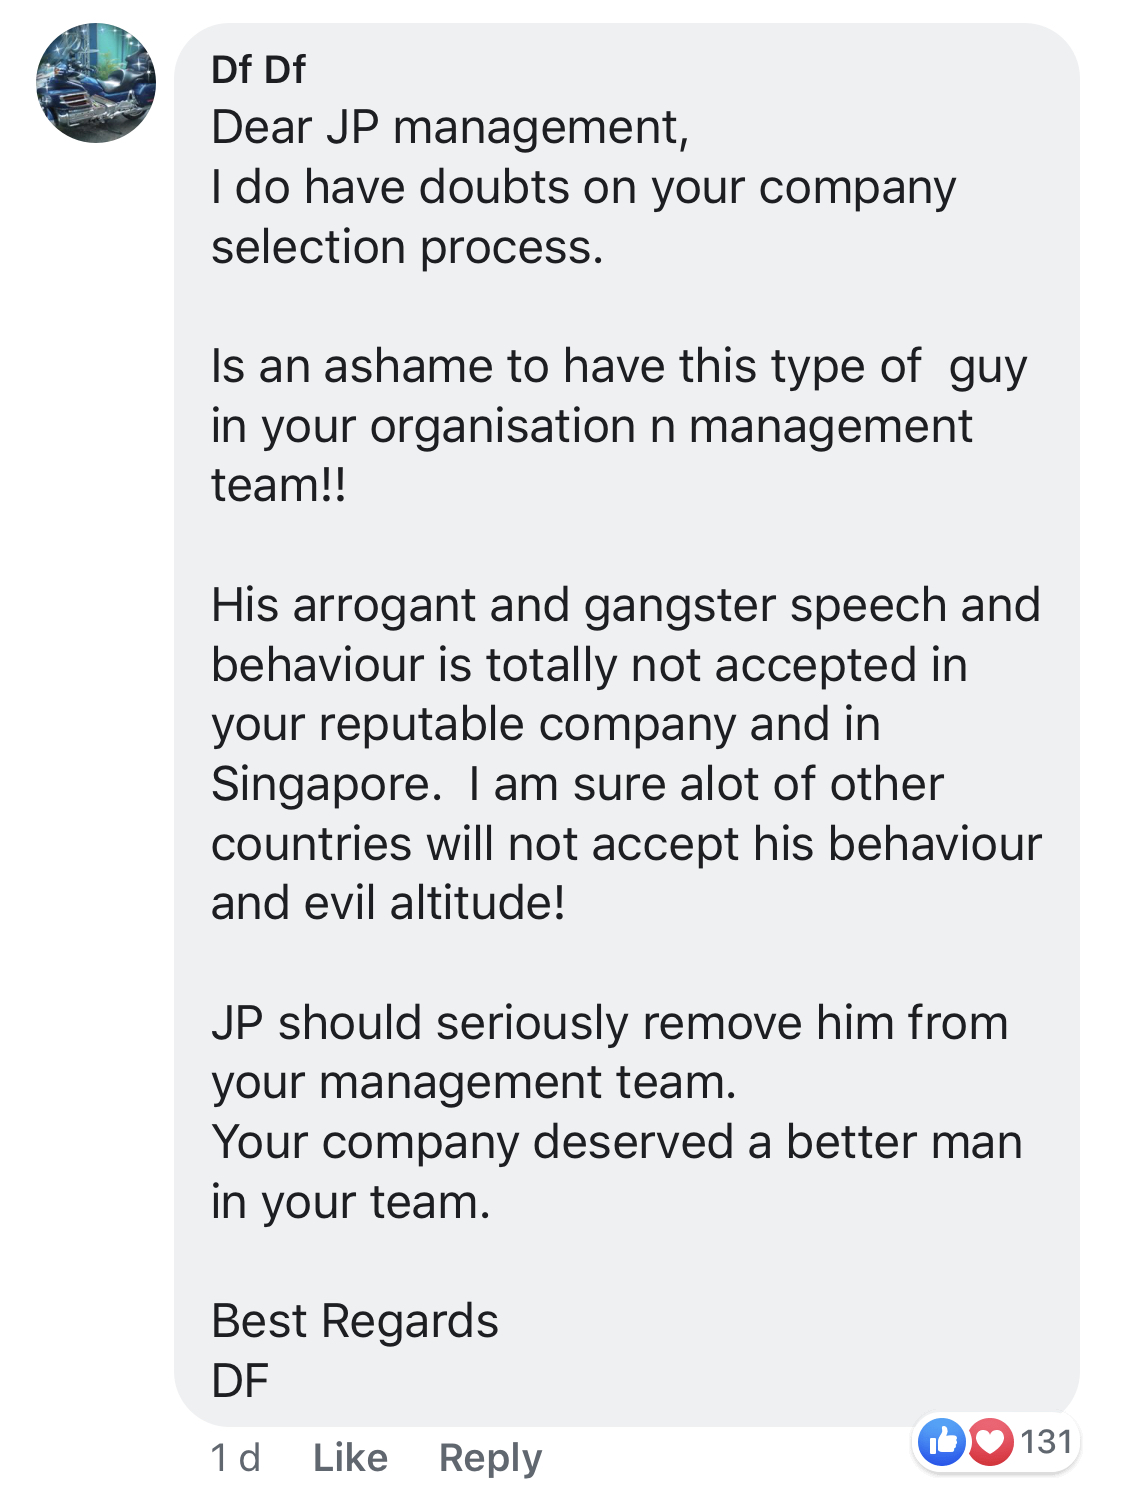 Commenters on JP Morgan Facebook page angry about an employee's abusive behavior